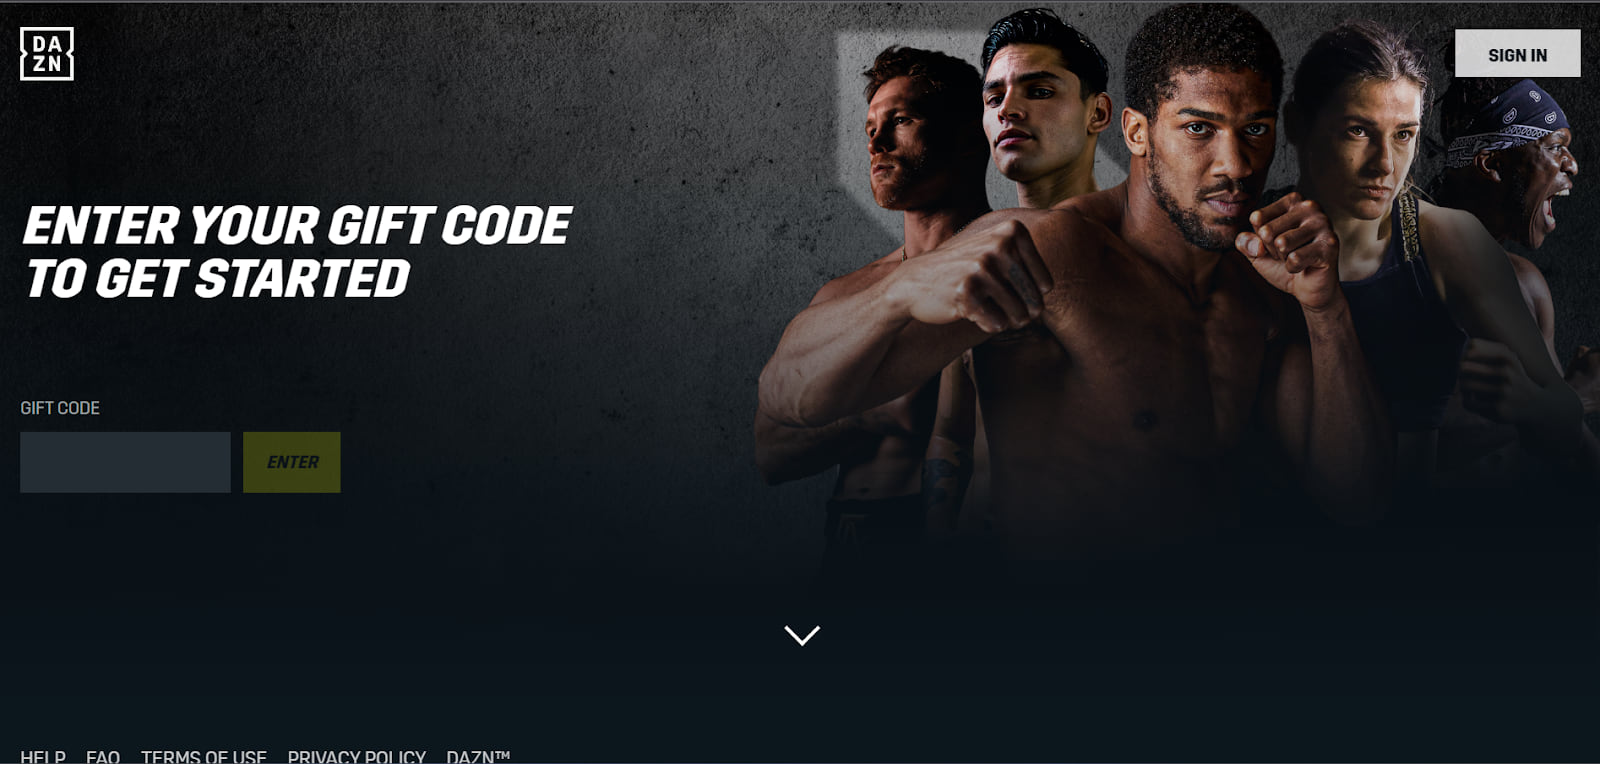 How To Use DAZN Promo Code 2